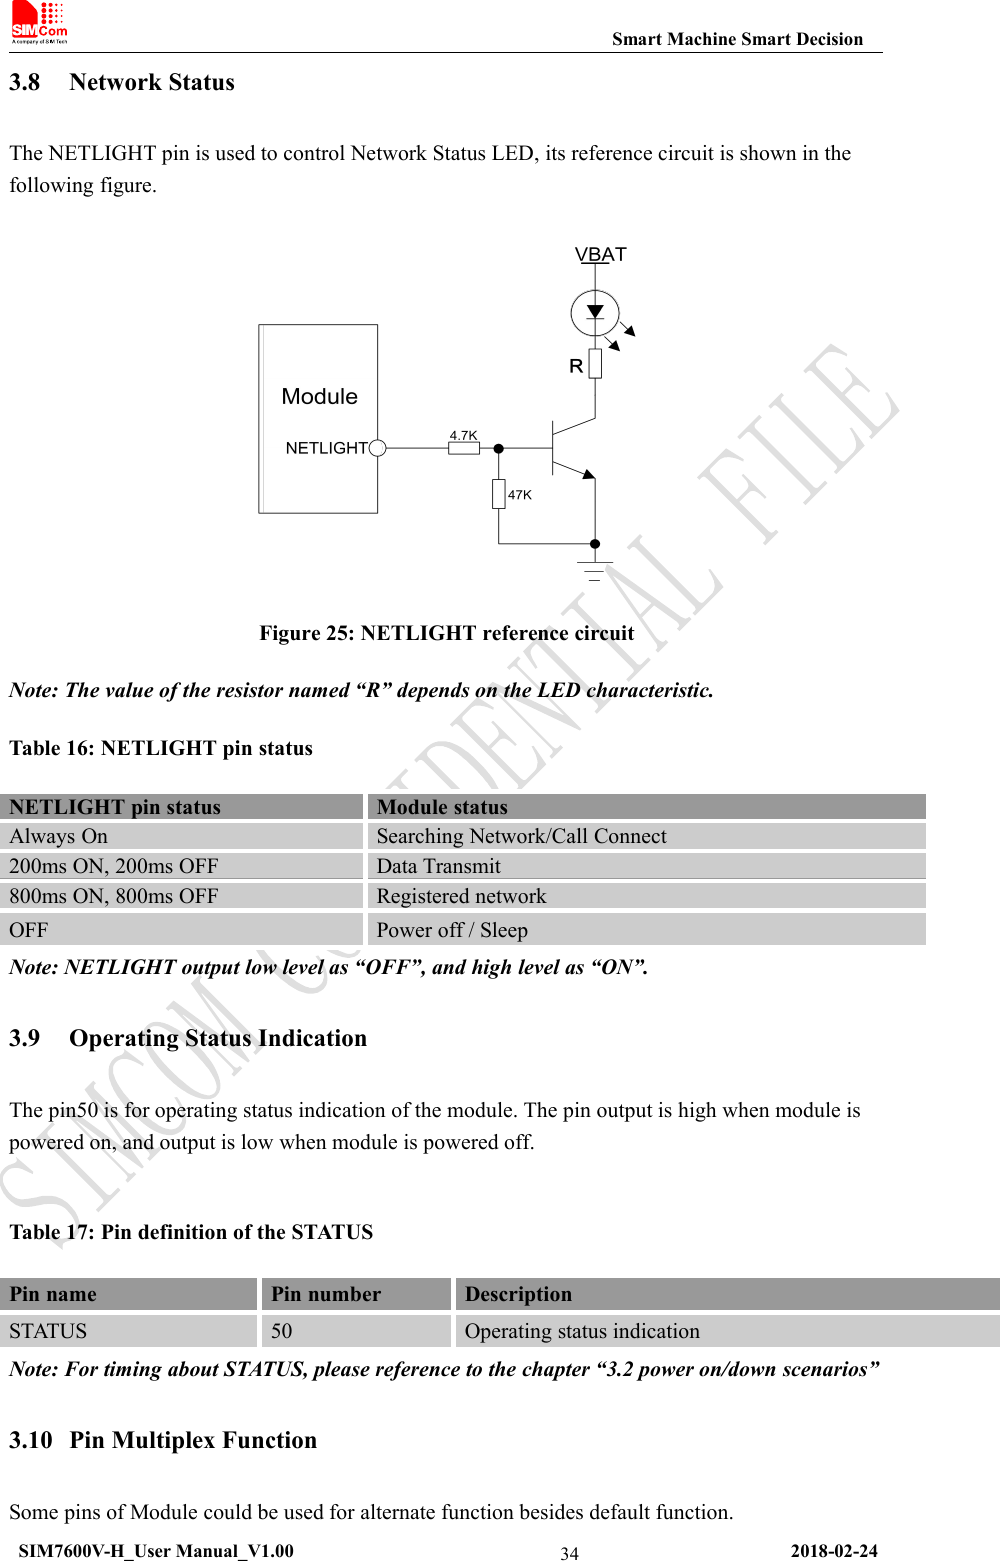 Smart Machine Smart DecisionSIM7600V-H_User Manual_V1.00 2018-02-24343.8 Network StatusThe NETLIGHT pin is used to control Network Status LED, its reference circuit is shown in thefollowing figure.Figure 25: NETLIGHT reference circuitNote: The value of the resistor named “R” depends on the LED characteristic.Table 16: NETLIGHT pin statusNETLIGHT pin statusModule statusAlways OnSearching Network/Call Connect200ms ON, 200ms OFFData Transmit800ms ON, 800ms OFFRegistered networkOFFPower off / SleepNote: NETLIGHT output low level as “OFF”, and high level as “ON”.3.9 Operating Status IndicationThe pin50 is for operating status indication of the module. The pin output is high when module ispowered on, and output is low when module is powered off.Table 17: Pin definition of the STATUSPin namePin numberDescriptionSTATUS50Operating status indicationNote: For timing about STATUS, please reference to the chapter “3.2 power on/down scenarios”3.10 Pin Multiplex FunctionSome pins of Module could be used for alternate function besides default function.